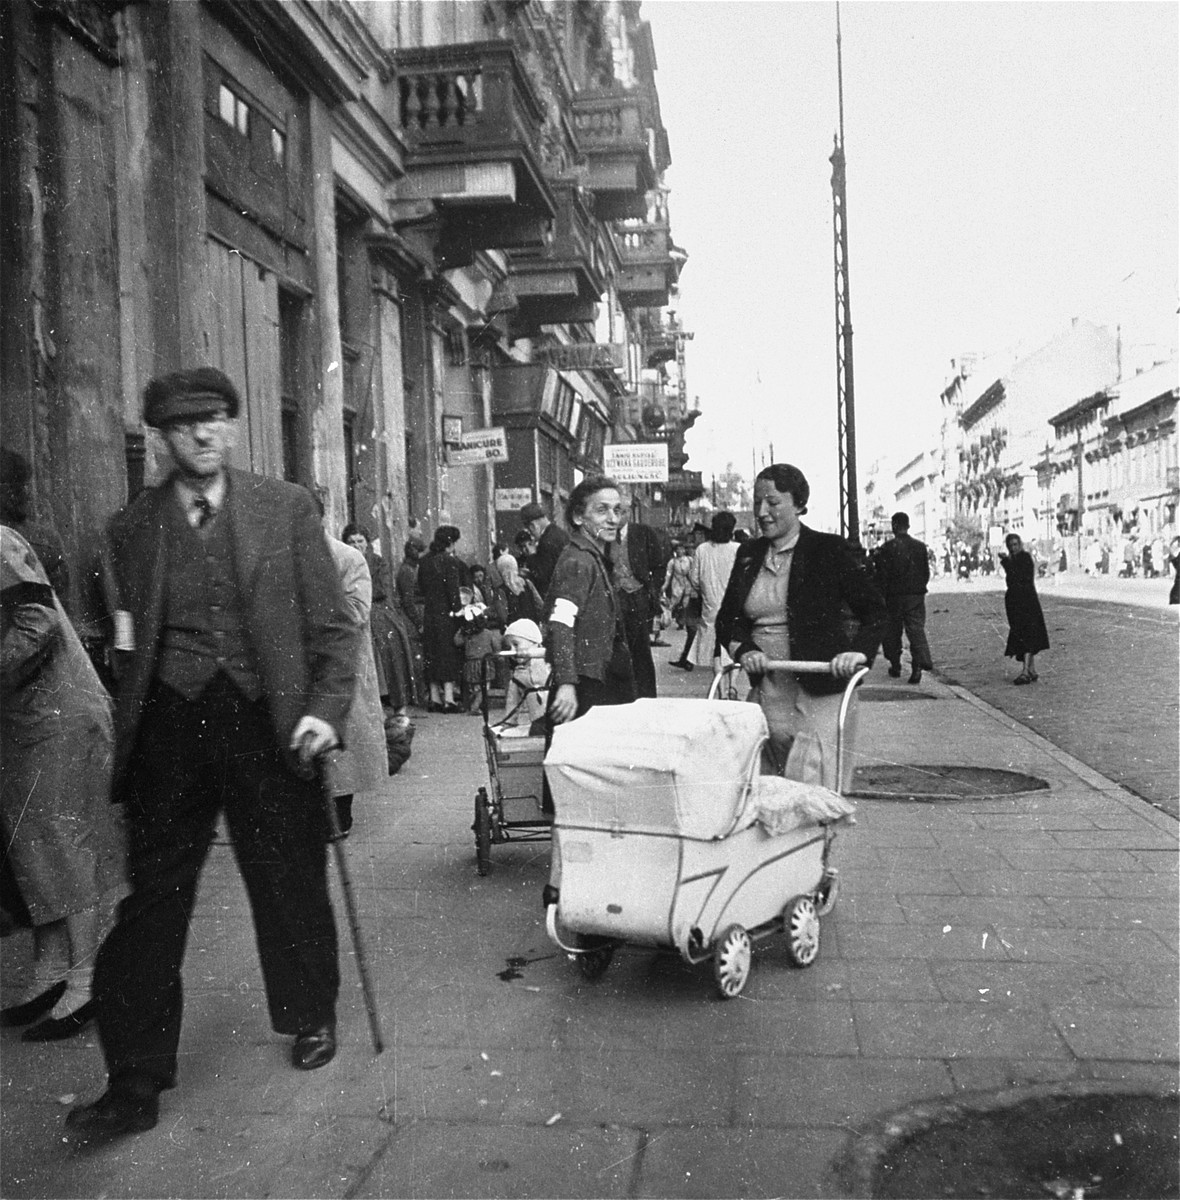 Two Jewish mothers on Leszno Street in the Warsaw ghetto.  

Joest's caption reads: "It looked like a normal street scene.  Furniture stores, a manicure shop, two women with baby carriages . . . If only the armbands were not visible.  I believe this was the Gerichtsstrasse, which was earlier called Leszno Street."